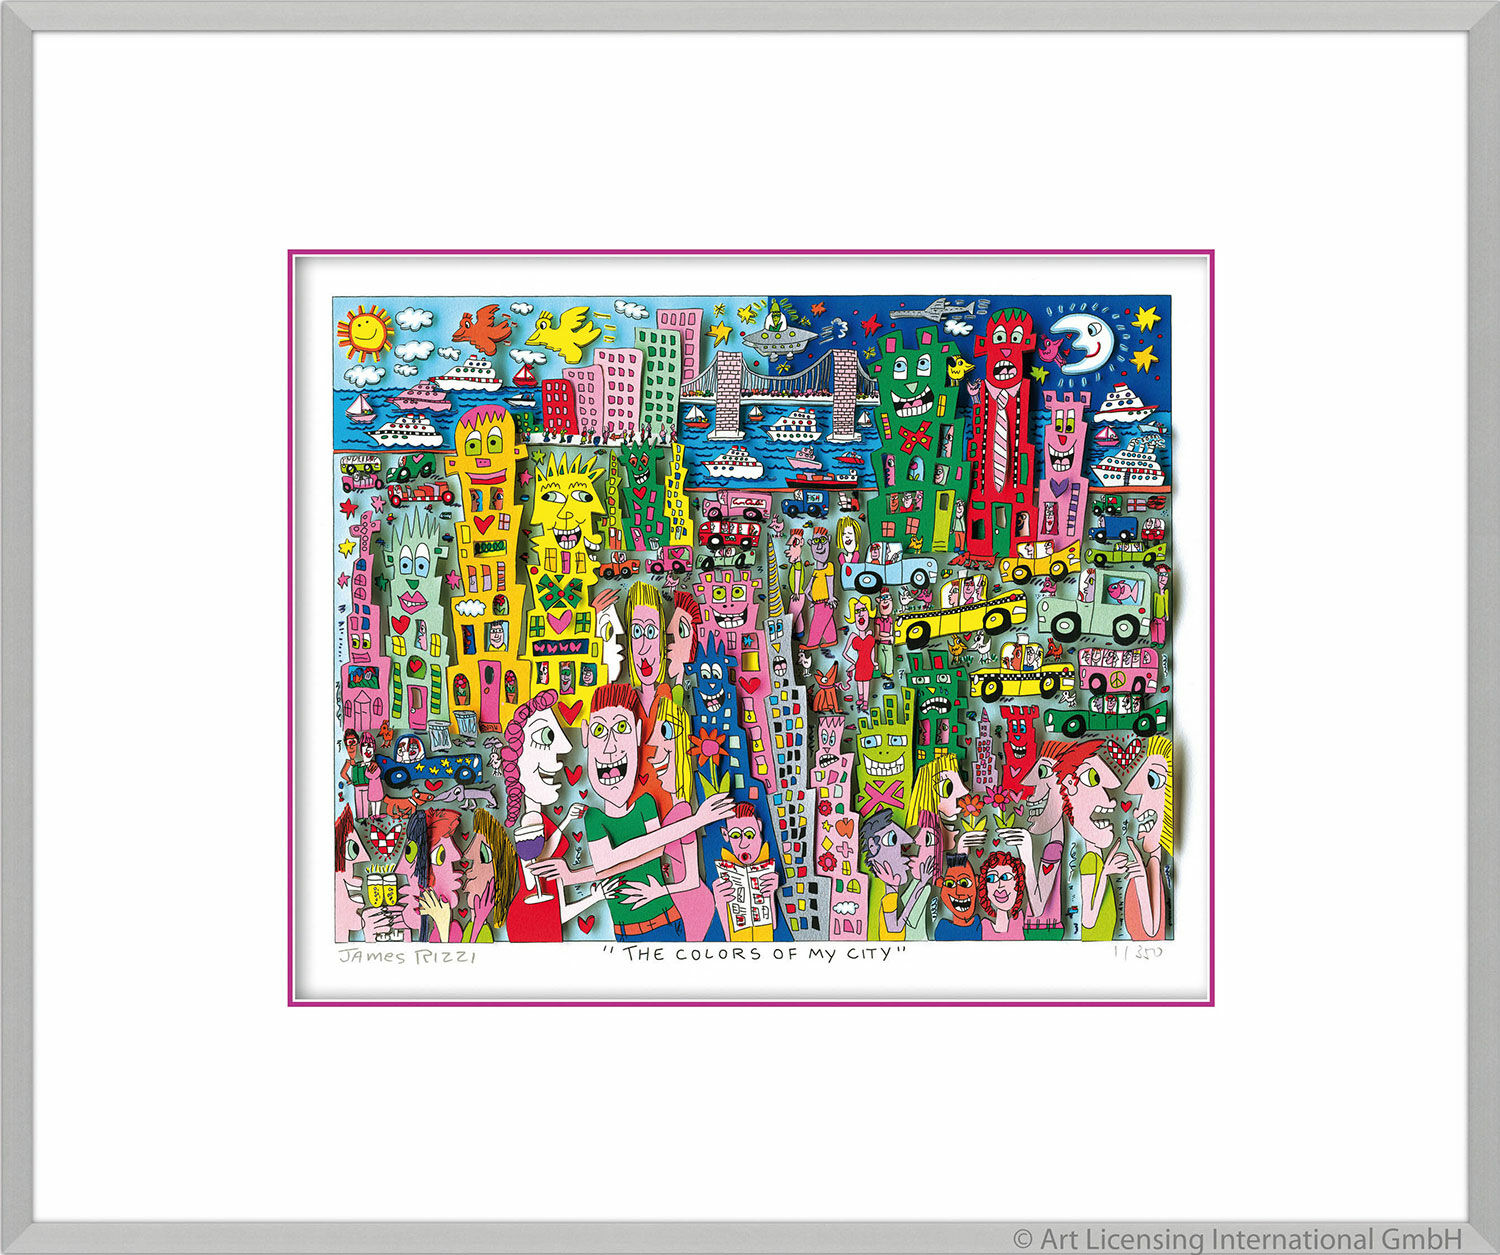 3D-billede "The Colors of my City" (2017), indrammet von James Rizzi